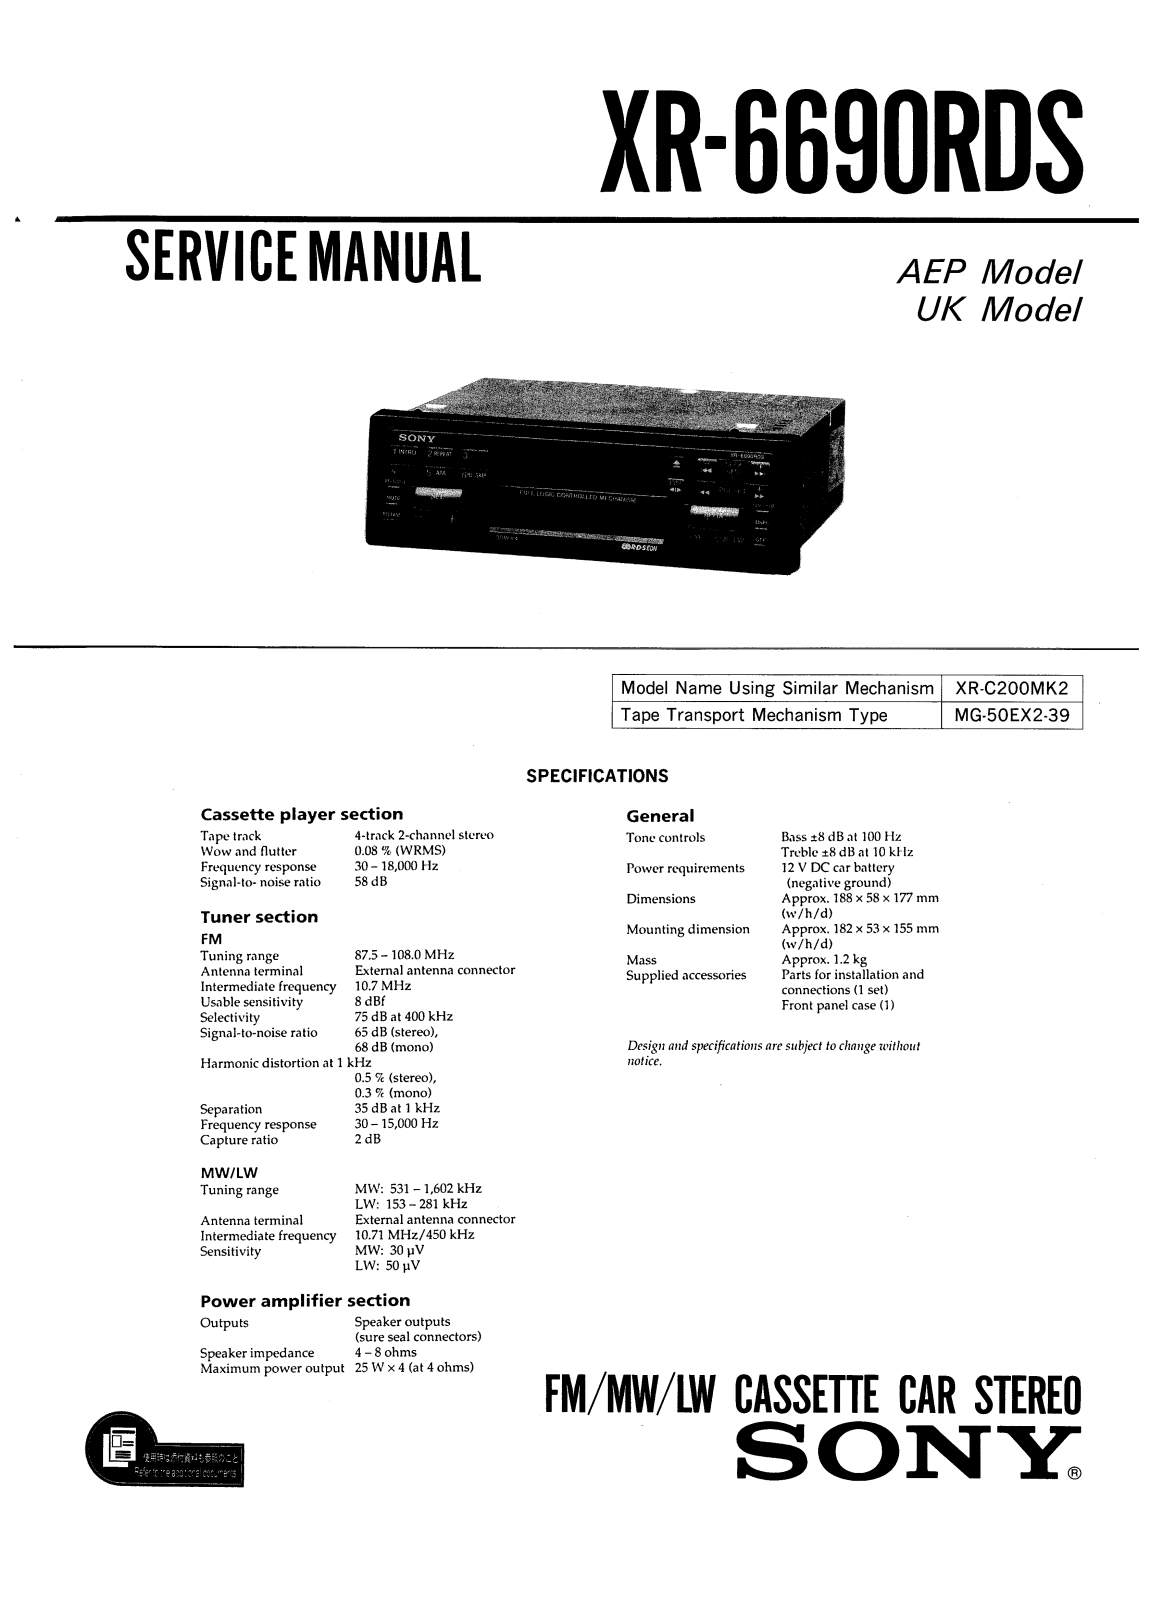 Sony XR-6690-RDS Service manual